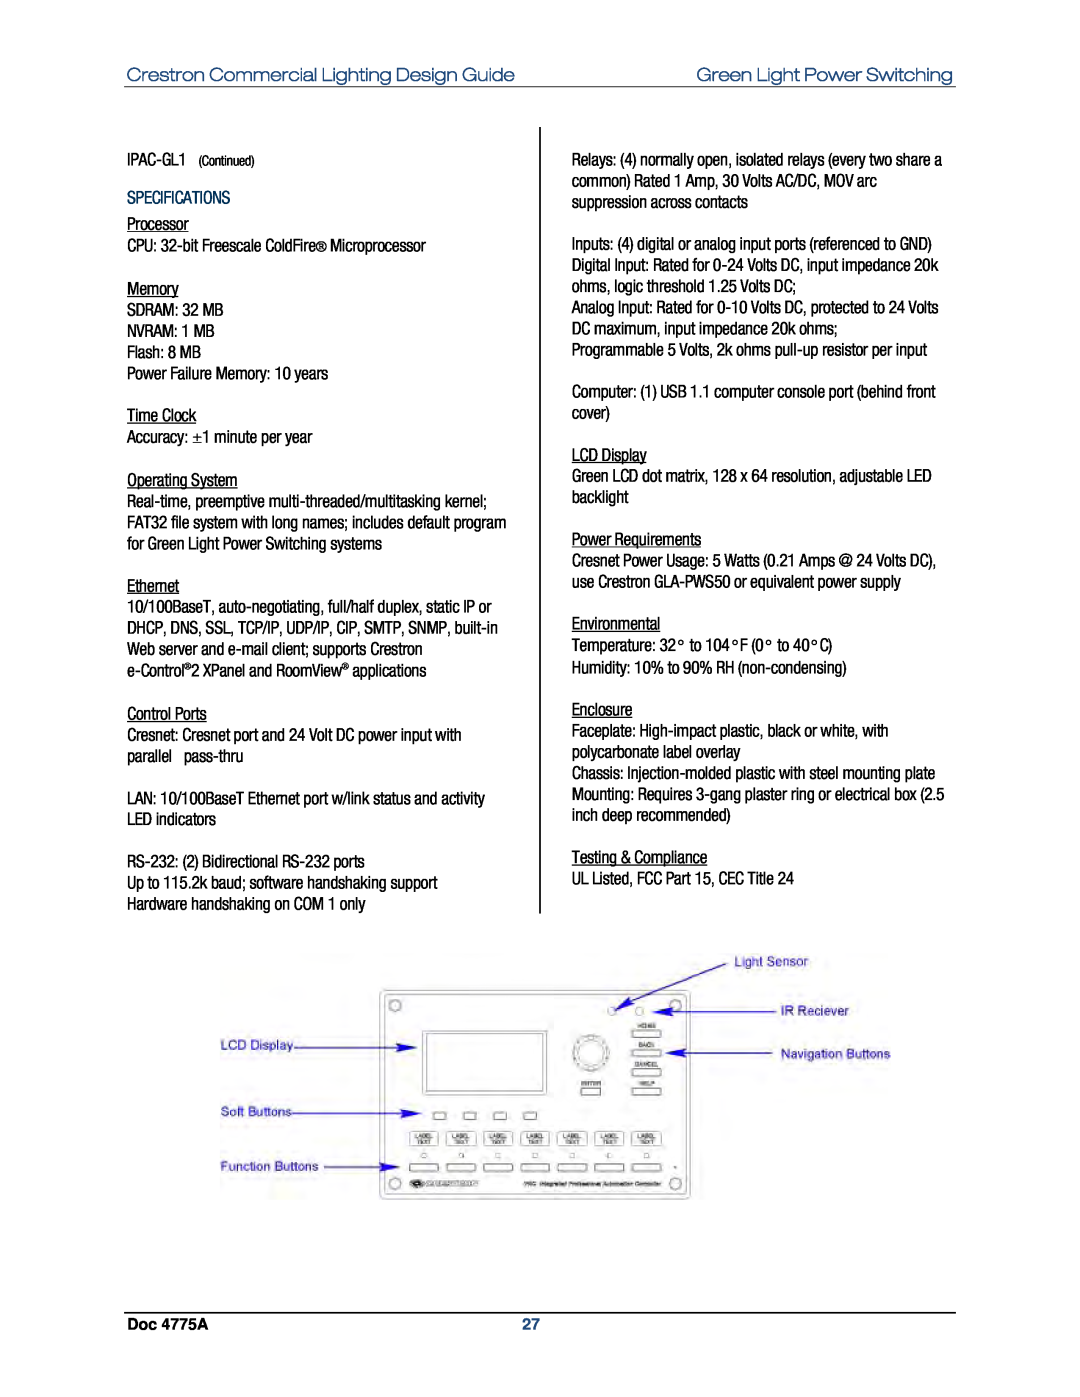 Crestron electronic GLPS-SW, IPAC-GL1 Crestron Commercial Lighting Design Guide, Green Light Power Switching, Processor 